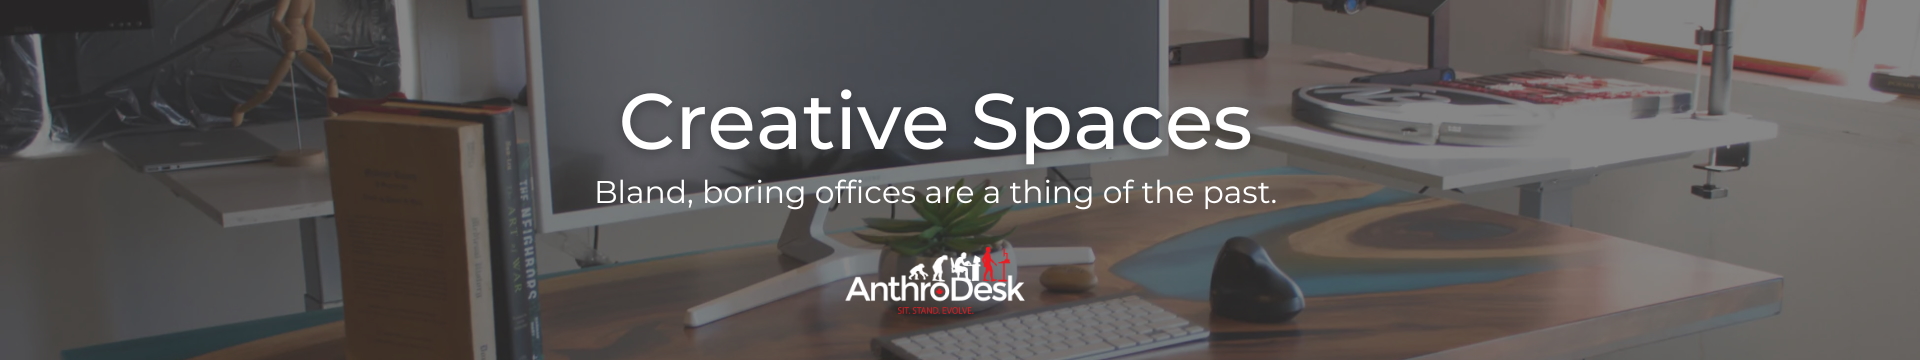 AnthroDesk Creative Spaces